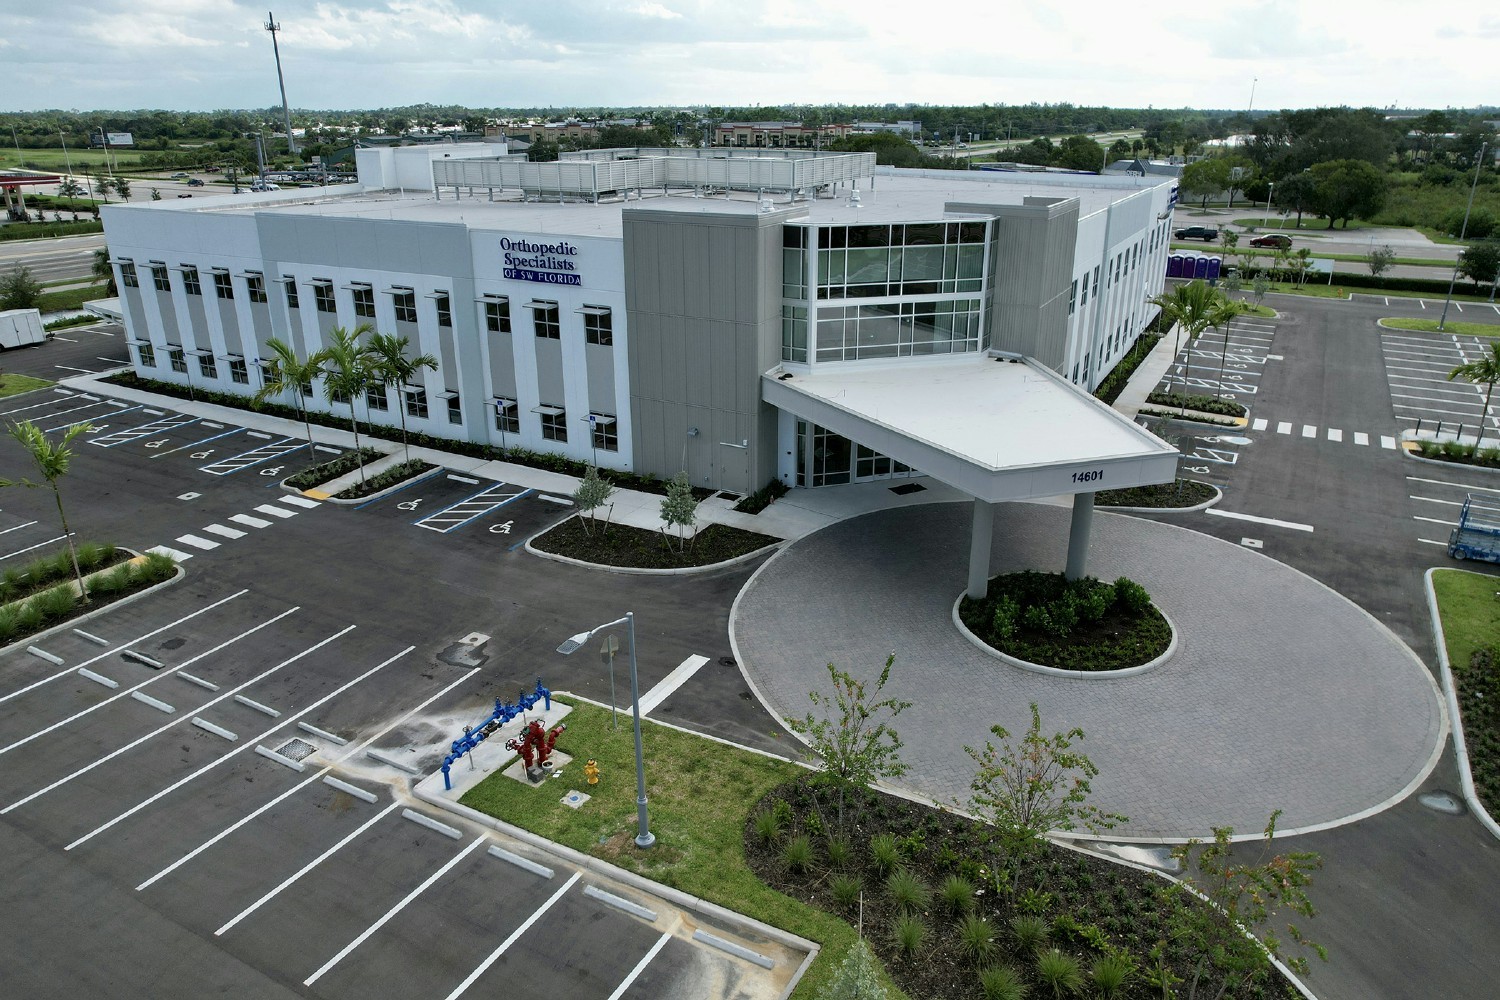 The new medical complex for Orthopedic Specialists of SW Florida!